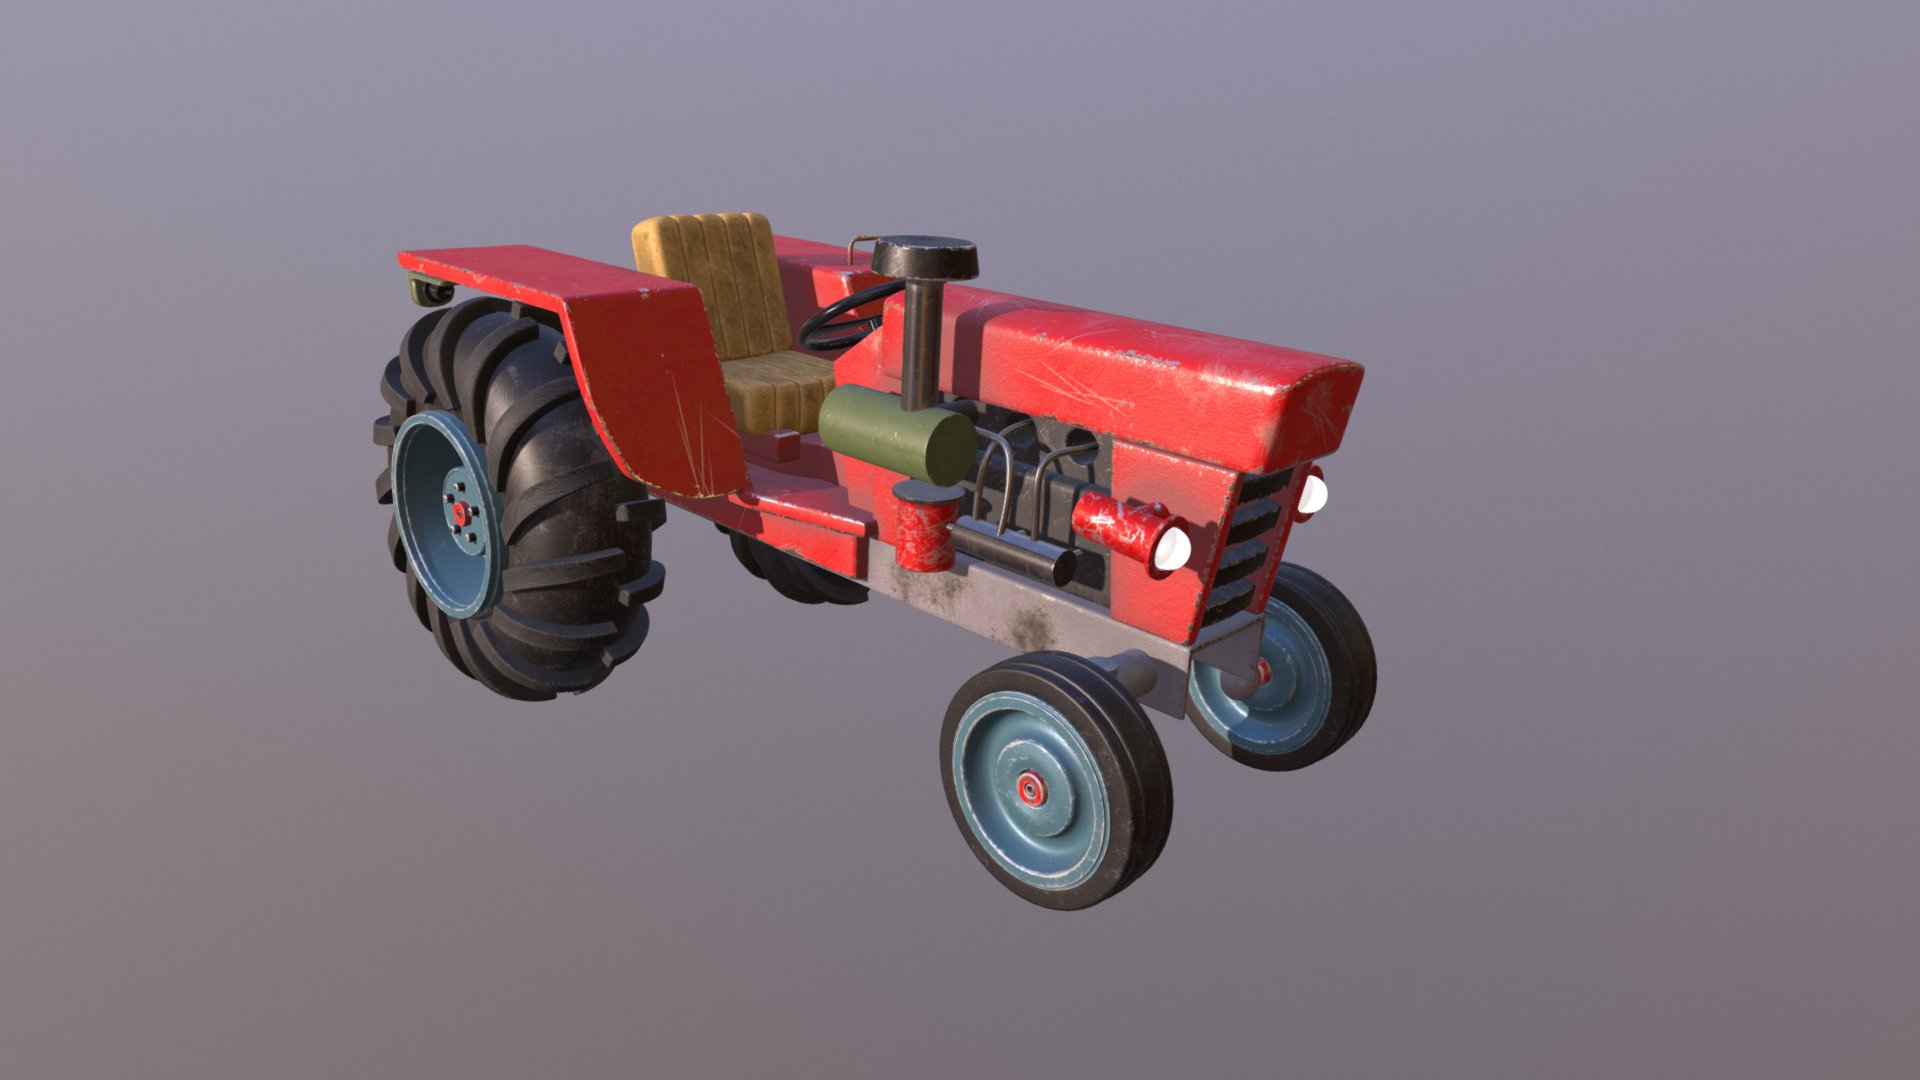 The red tractor textured - The Red Tractor textured - 3D model by Keith (@beefkeef) 3d model